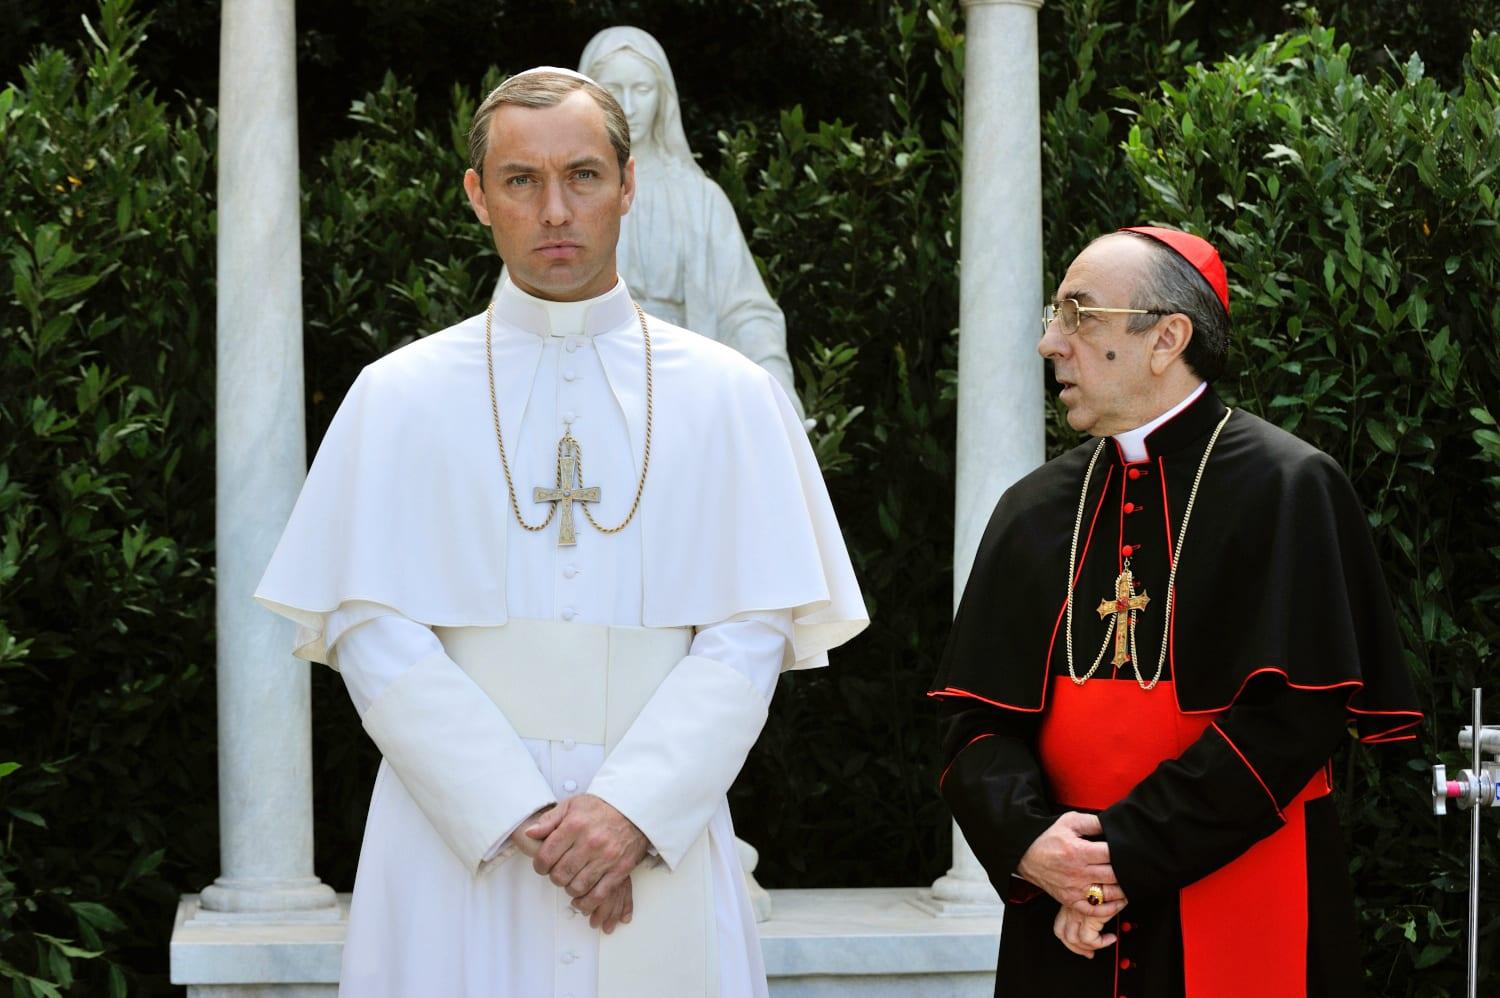 Jude Law stars as a disruptive pontiff in HBO’s ‘Young Pope’